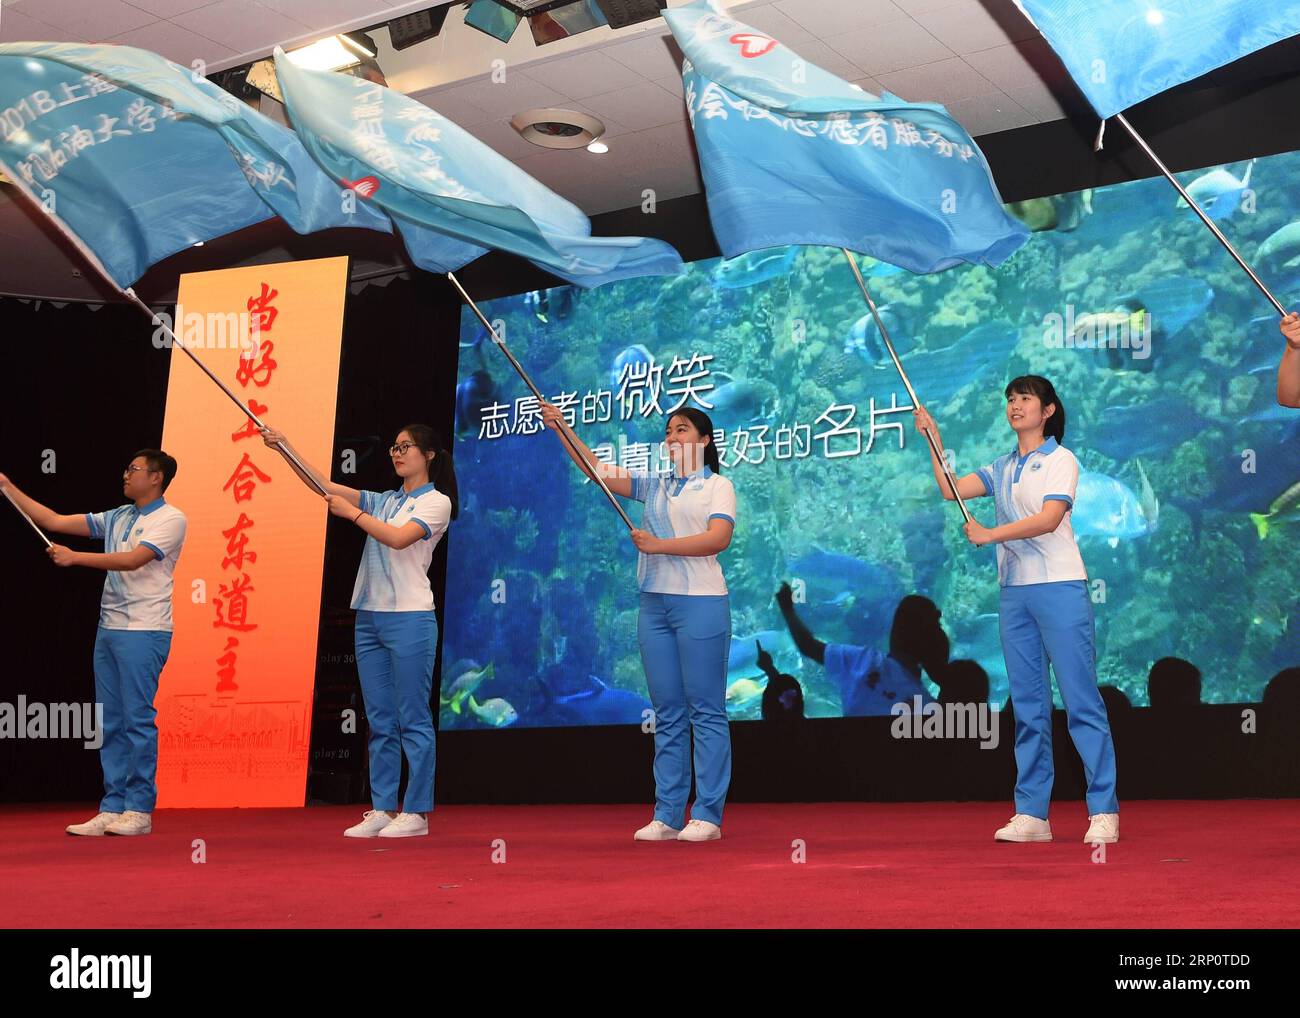 (180524) -- QINGDAO, May 24, 2018 -- Volunteers attend a launch ceremony for the volunteer program for the upcoming Shanghai Cooperation Organization (SCO) summit in Qingdao, east China s Shandong Province, May 24, 2018. About 2,000 volunteers will offer services such as assisting with guests arrival and departure, translation, and media requests during the 18th summit of the SCO. ) (wyl) CHINA-QINGDAO-SCO-SUMMIT-VOLUNTEER (CN) LixZiheng PUBLICATIONxNOTxINxCHN Stock Photo